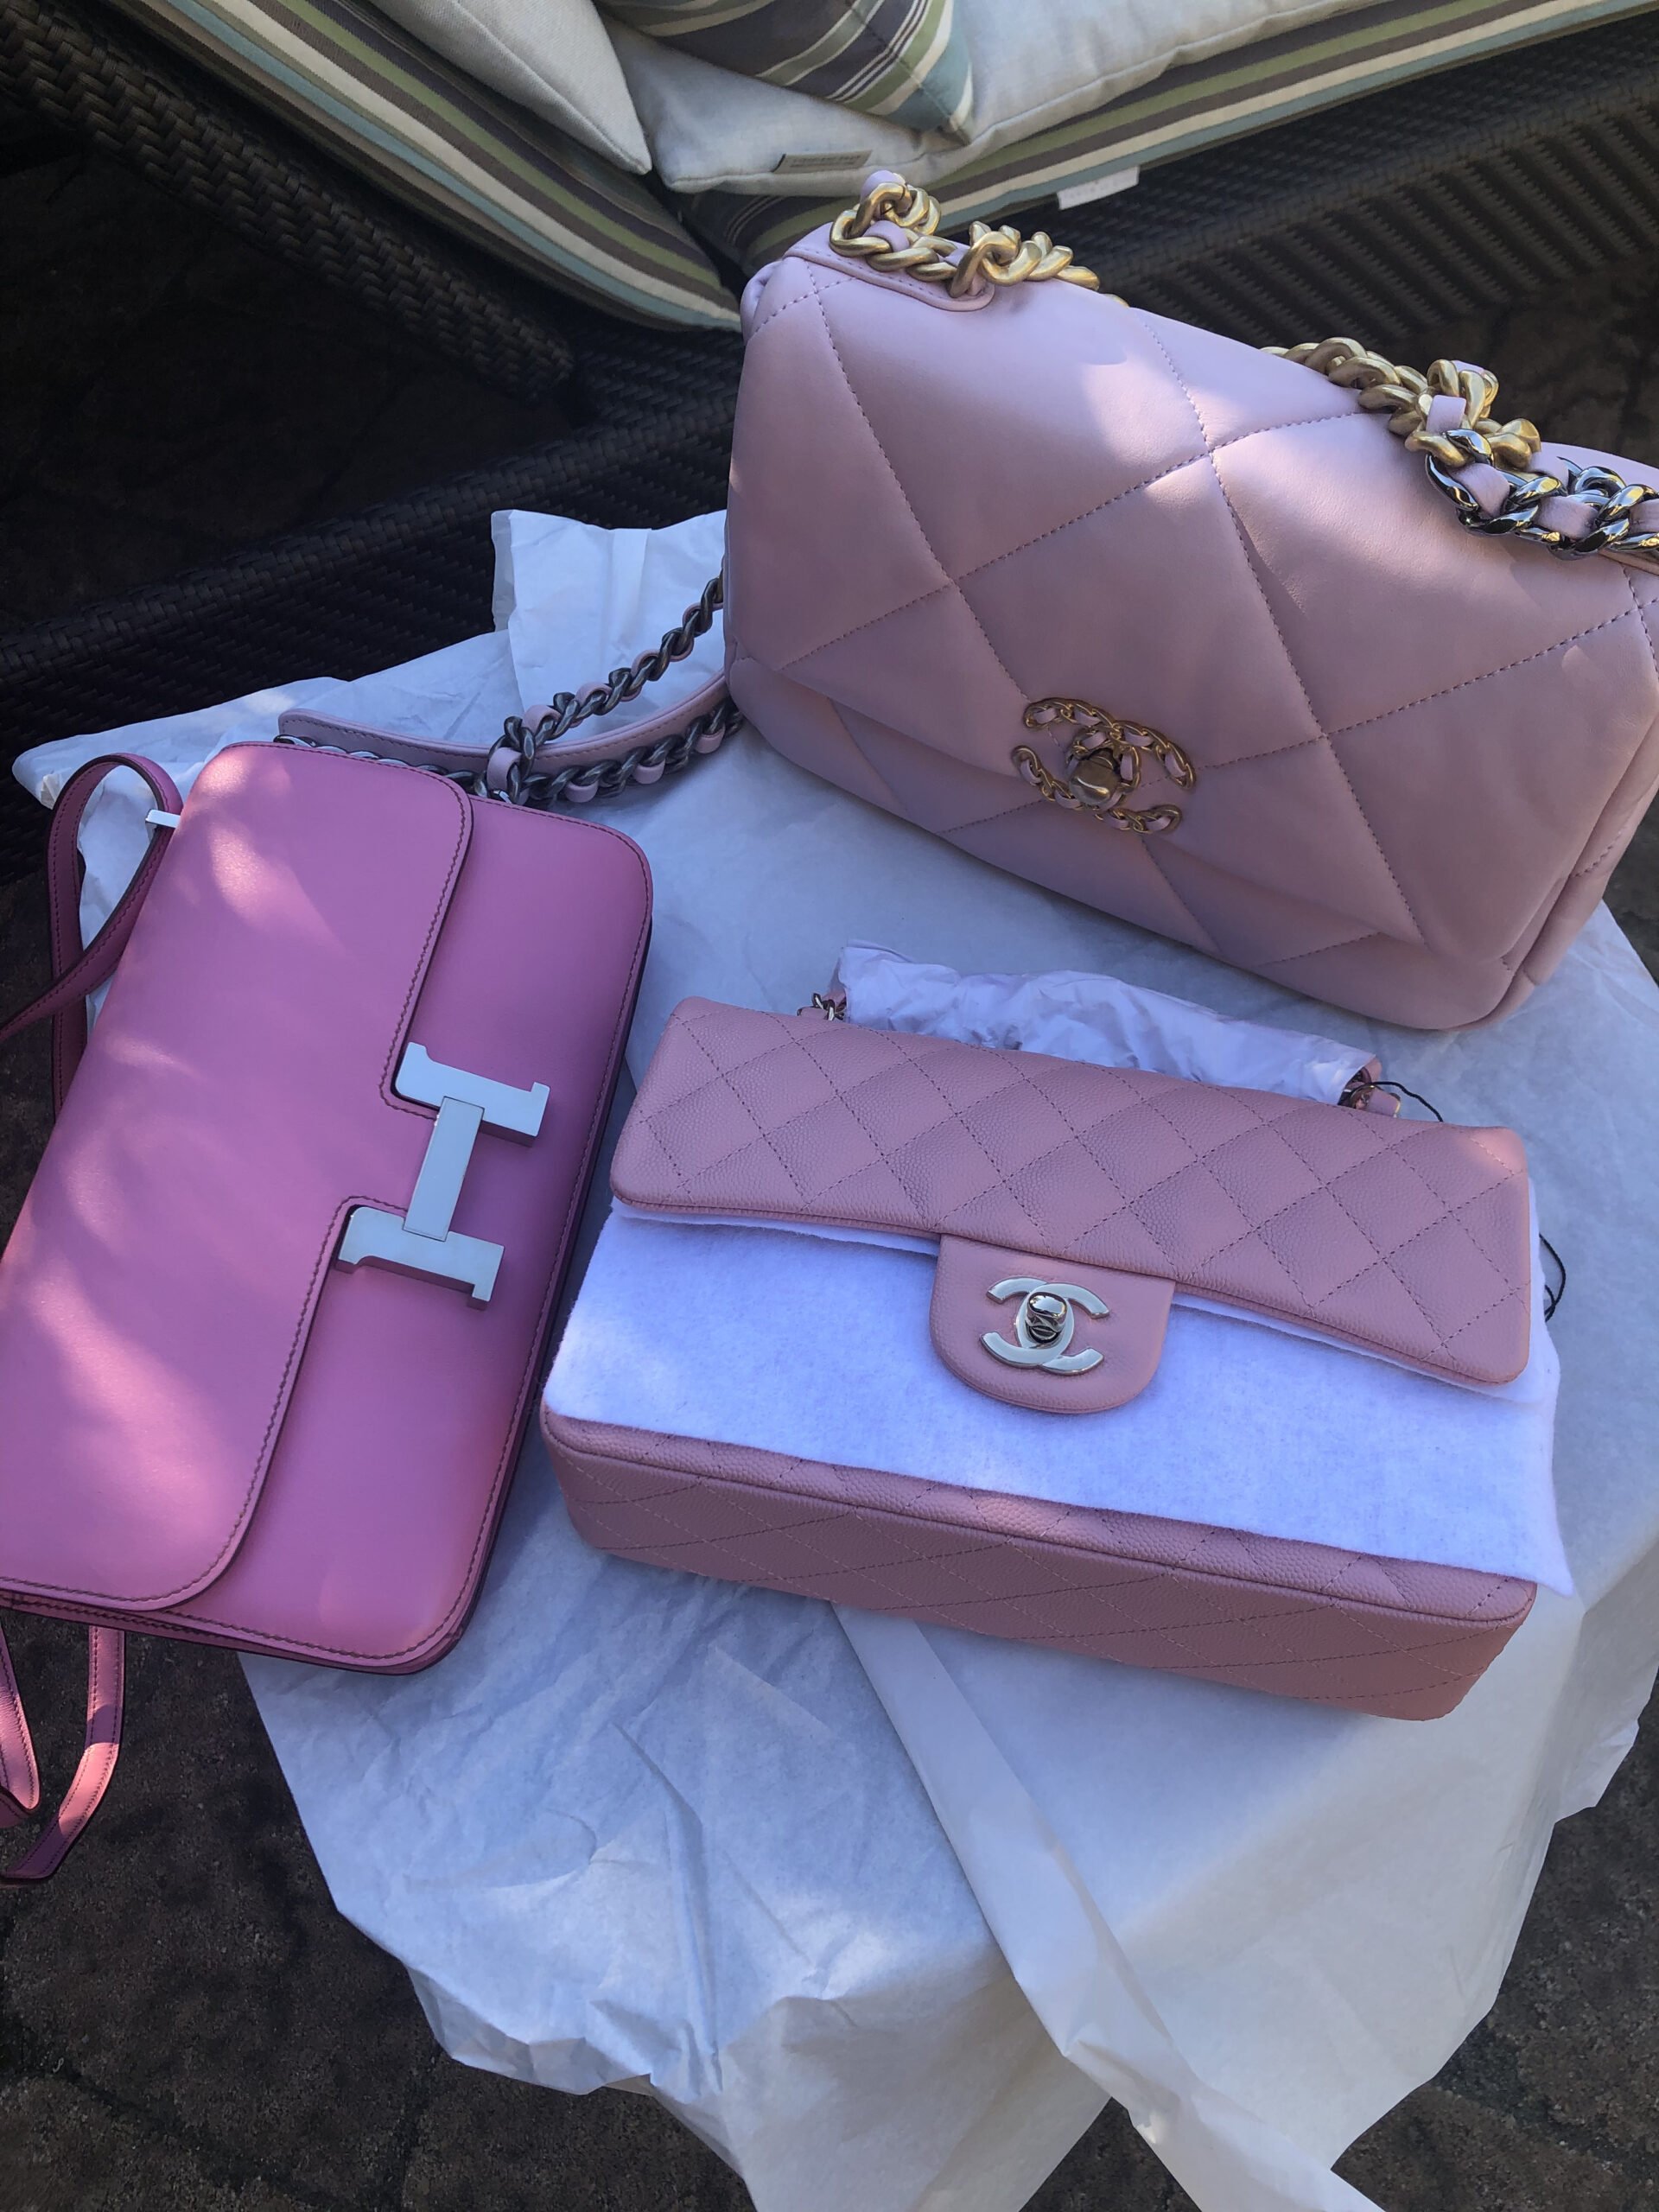 The Best Pink Chanel Bag? Comparison between the 22c Pink and